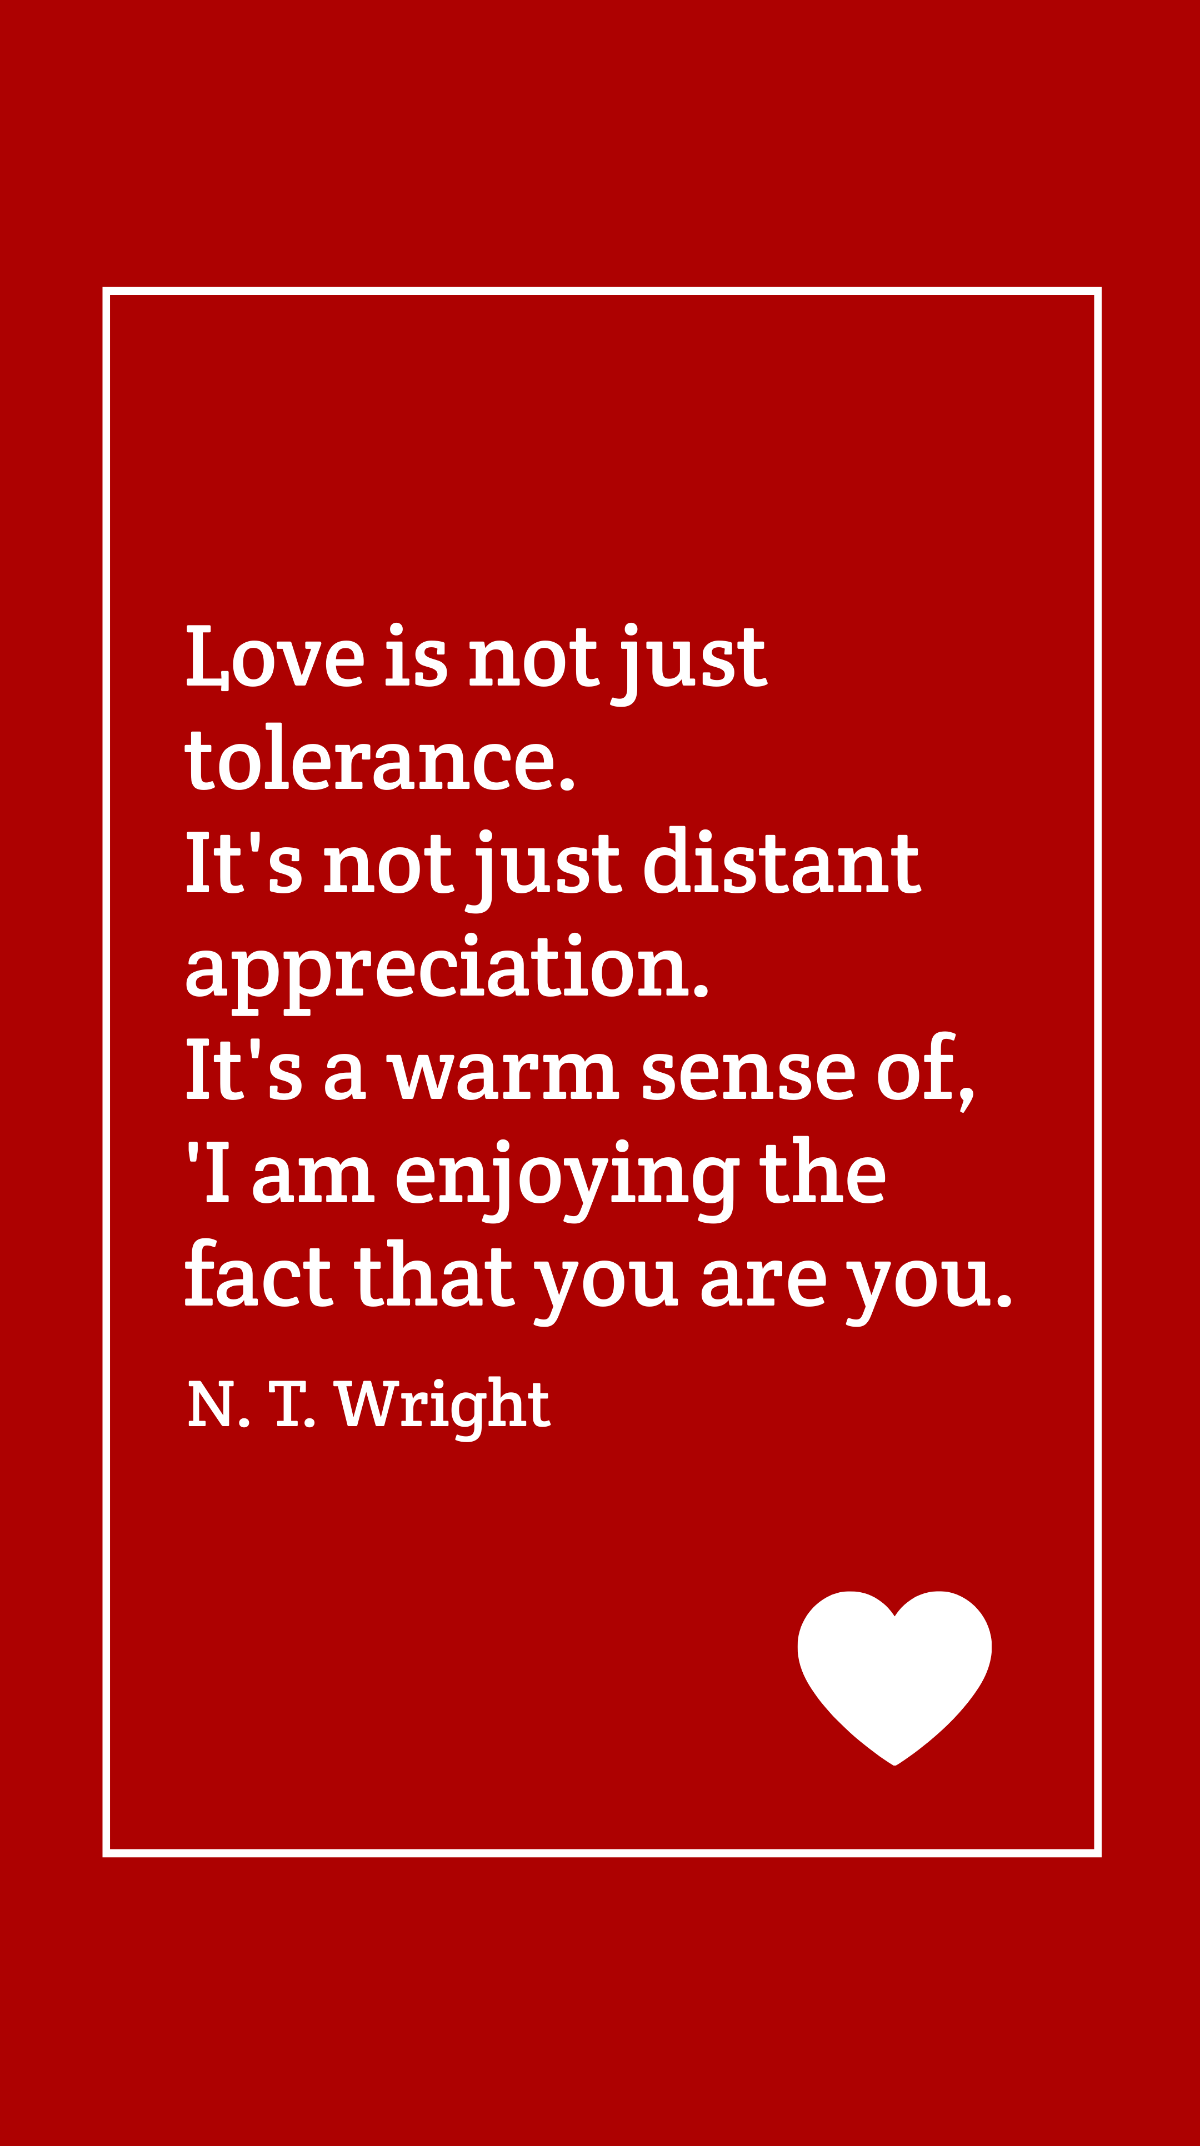 N. T. Wright - Love is not just tolerance. It's not just distant appreciation. It's a warm sense of, 'I am enjoying the fact that you are you.